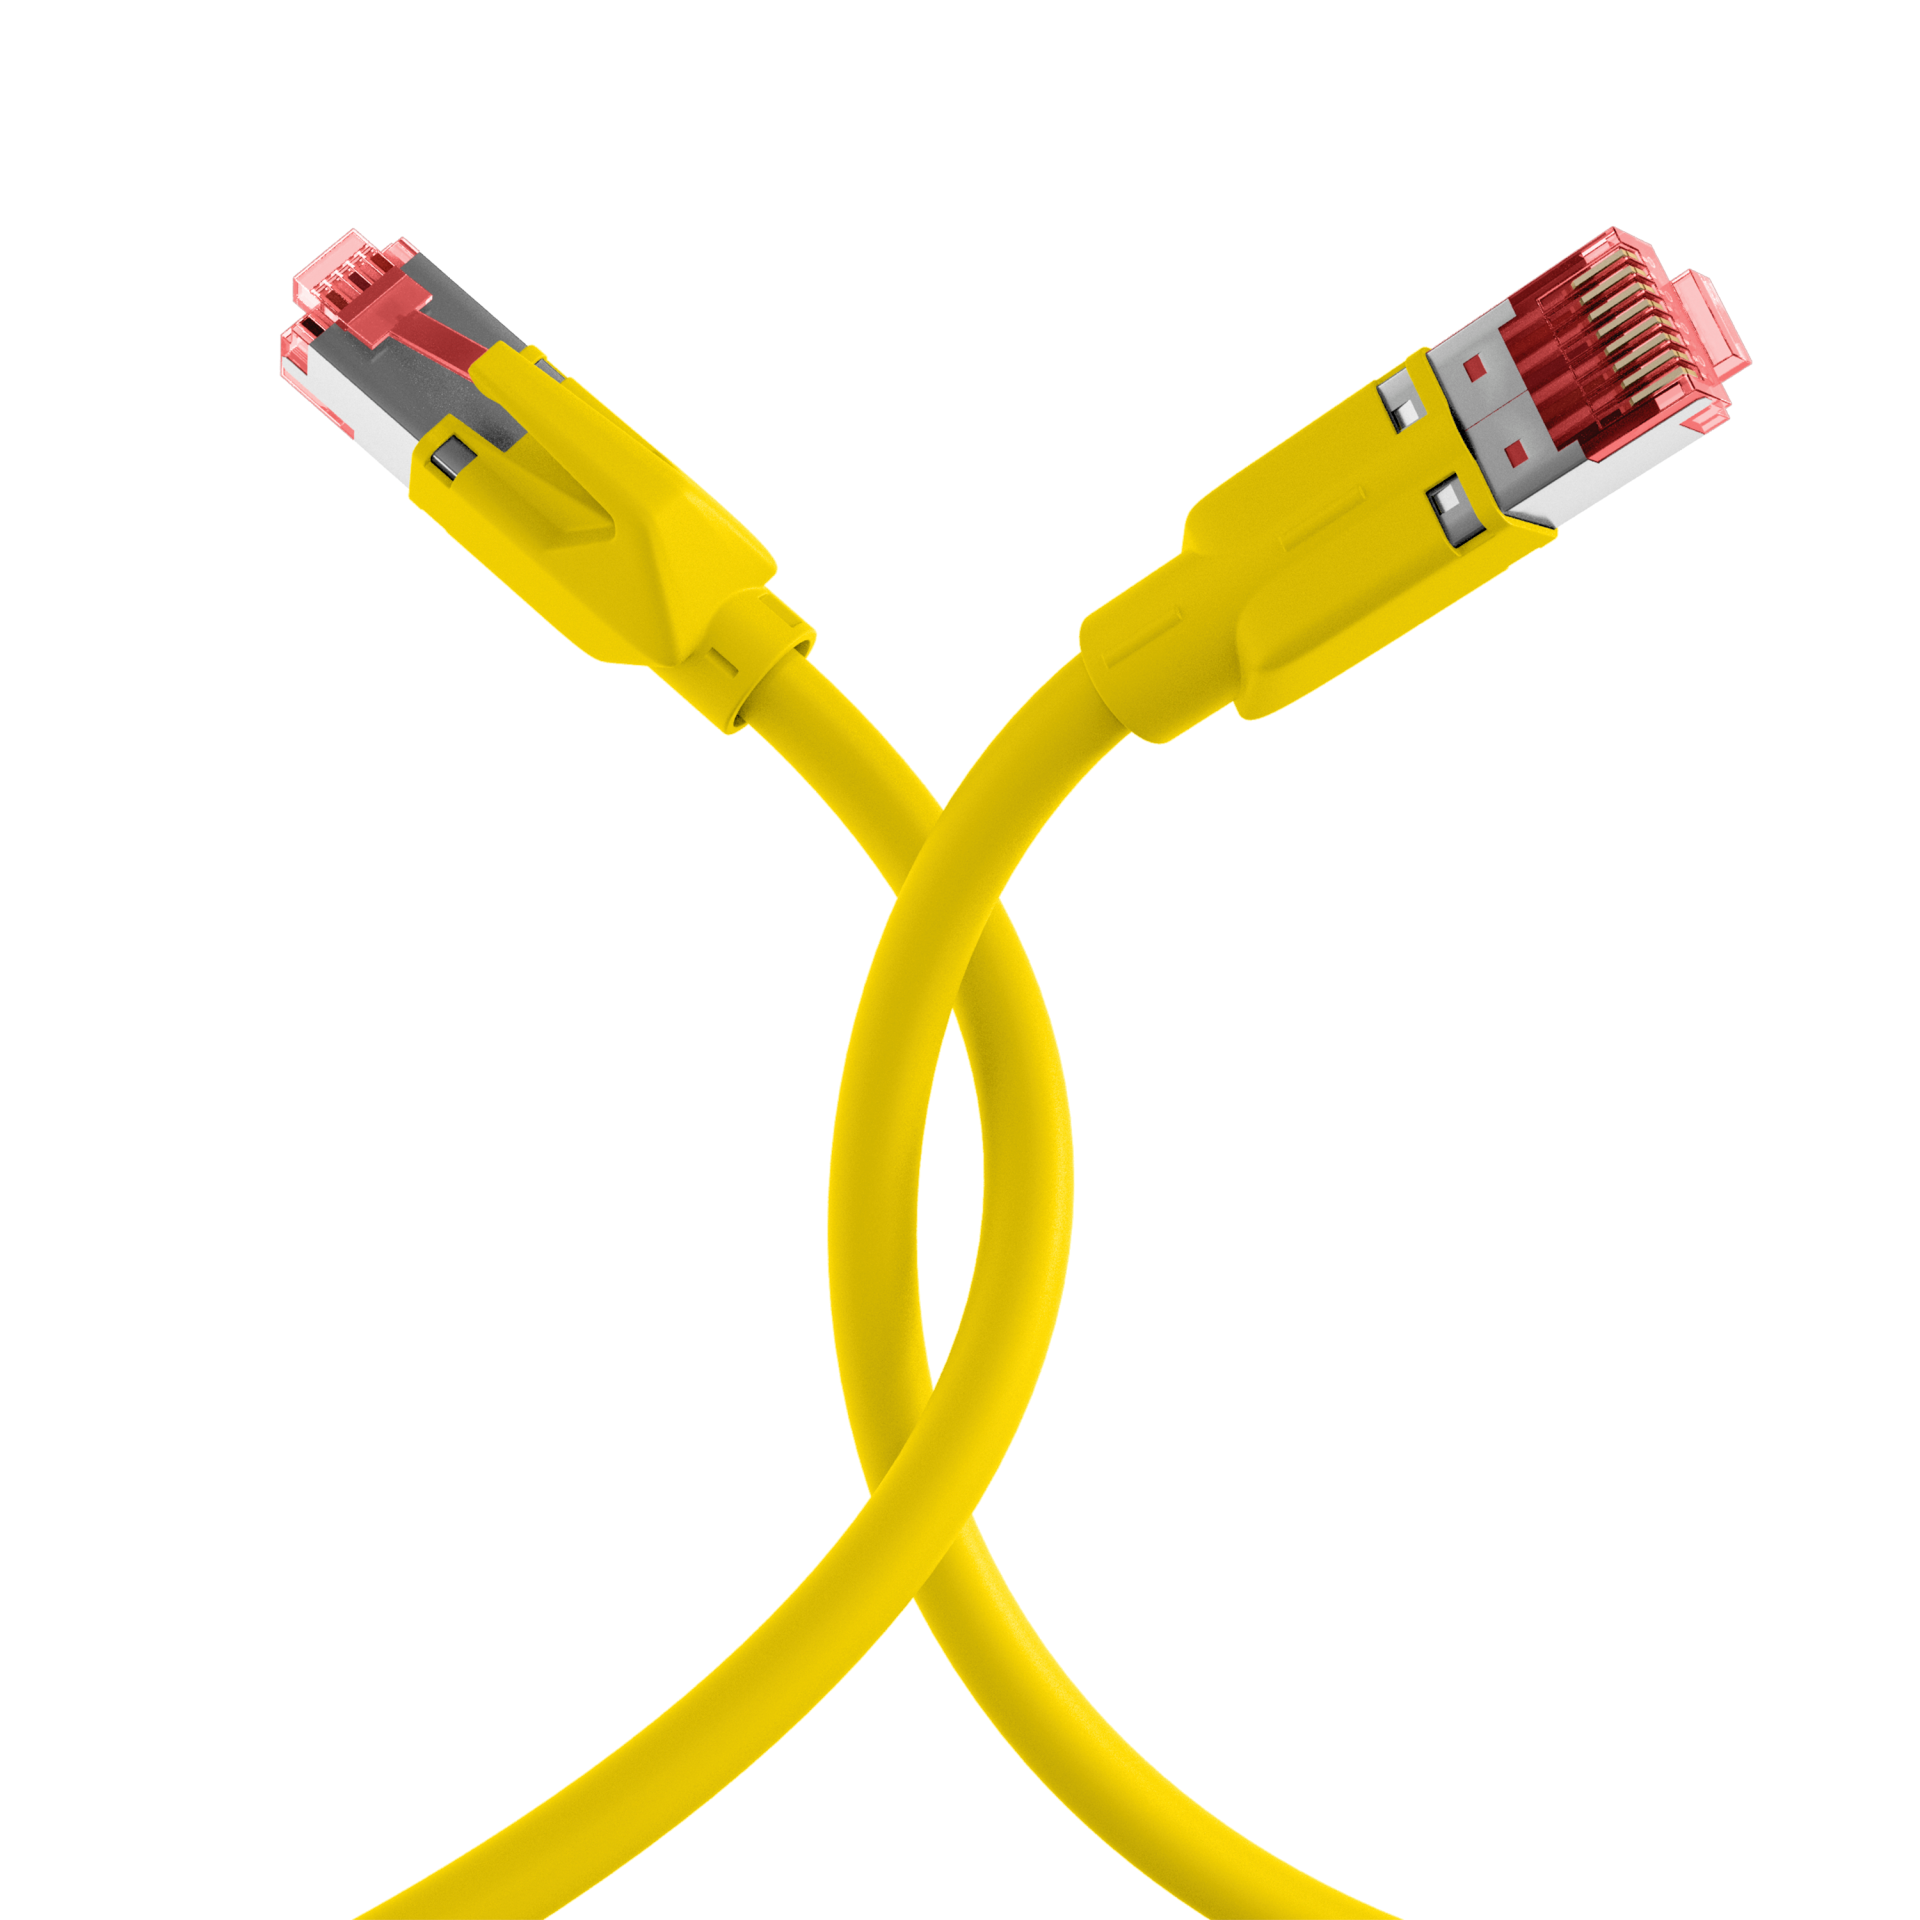 RJ45 Patch Cord Cat.5e S/UTP PUR TM21 for drag chains yellow 40m